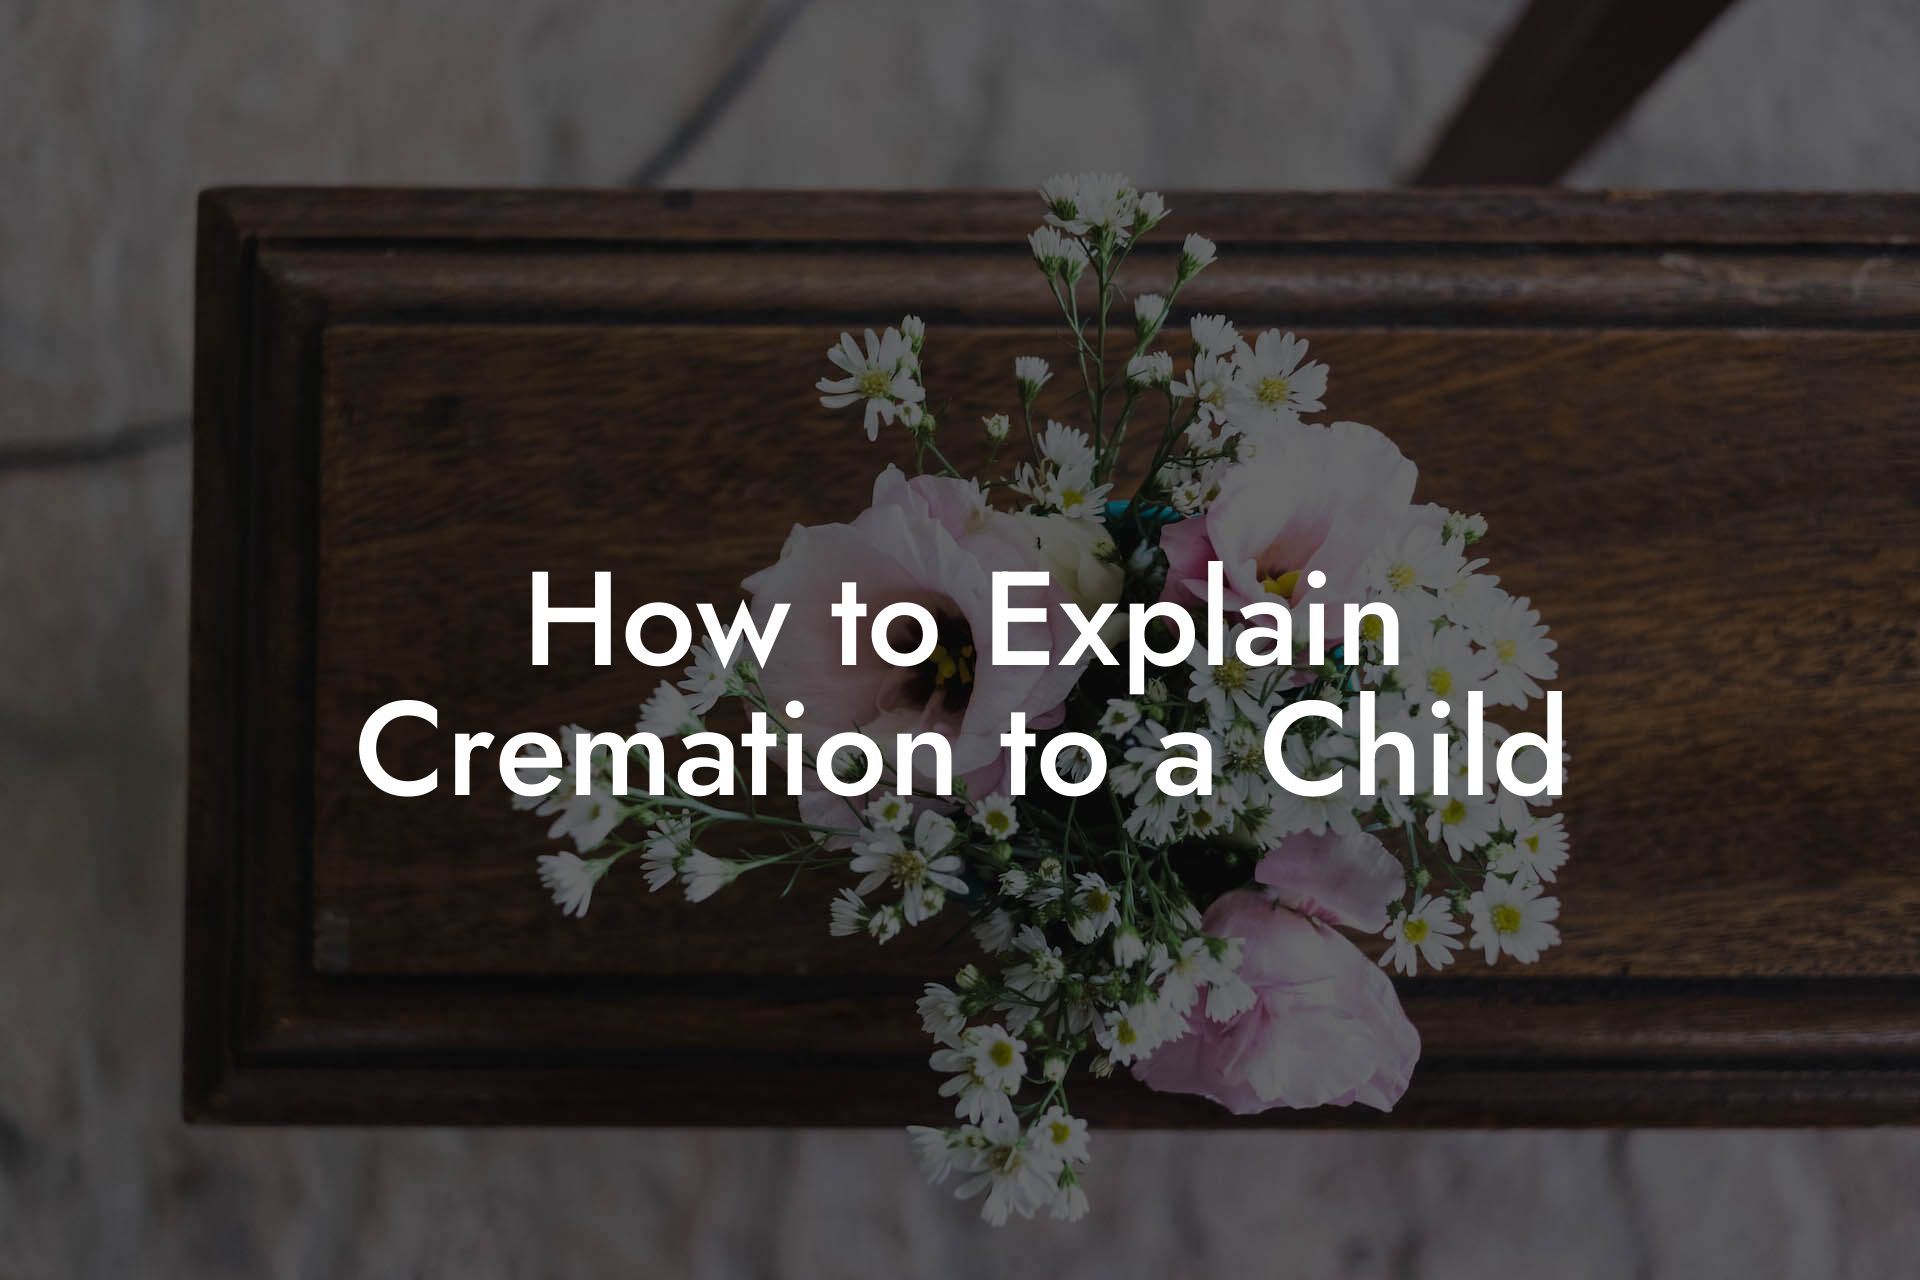 How to Explain Cremation to a Child